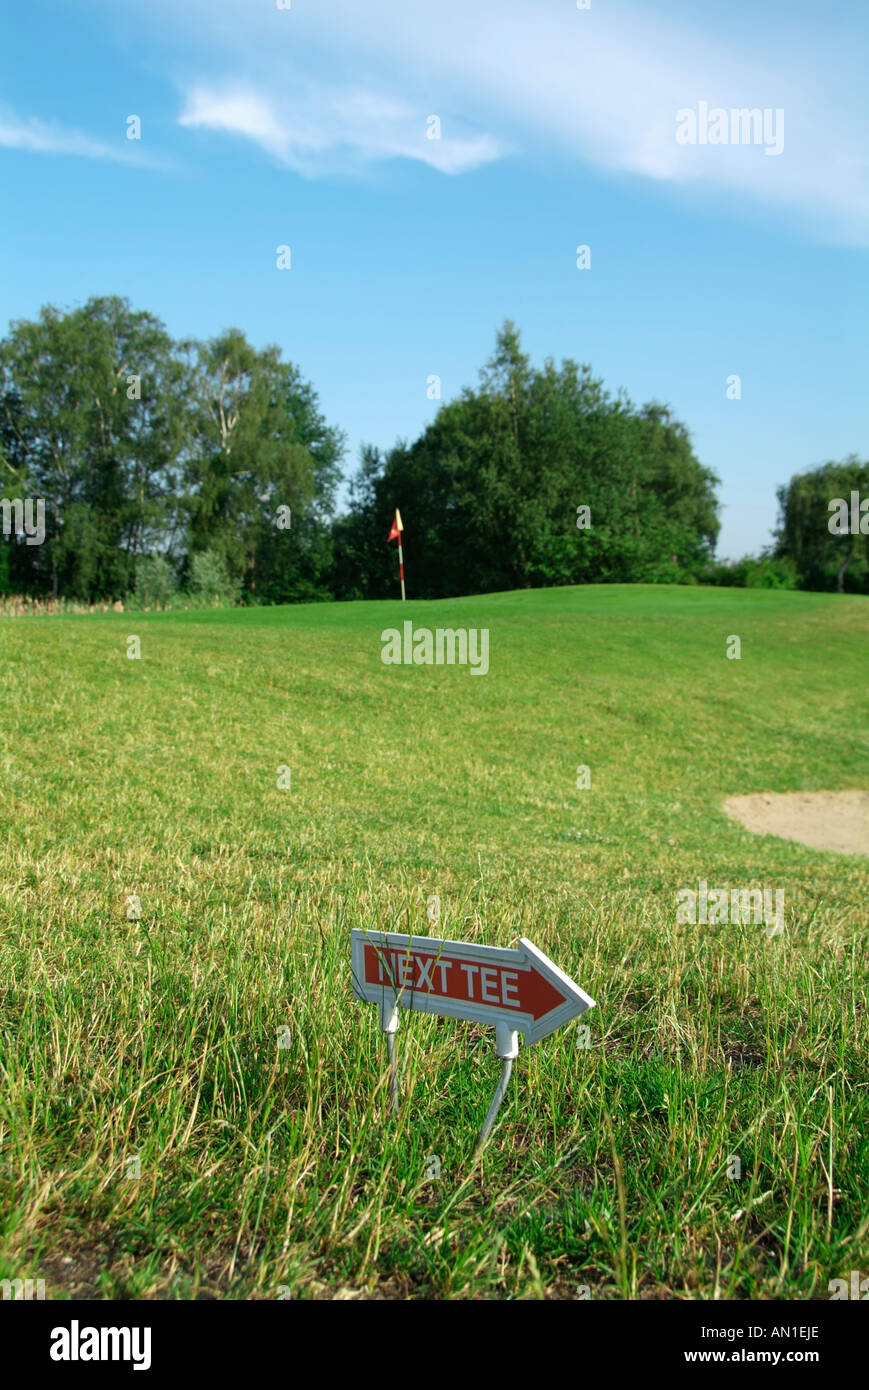 Golf Golfing Golfsport, detail of sign on golf course Stock Photo